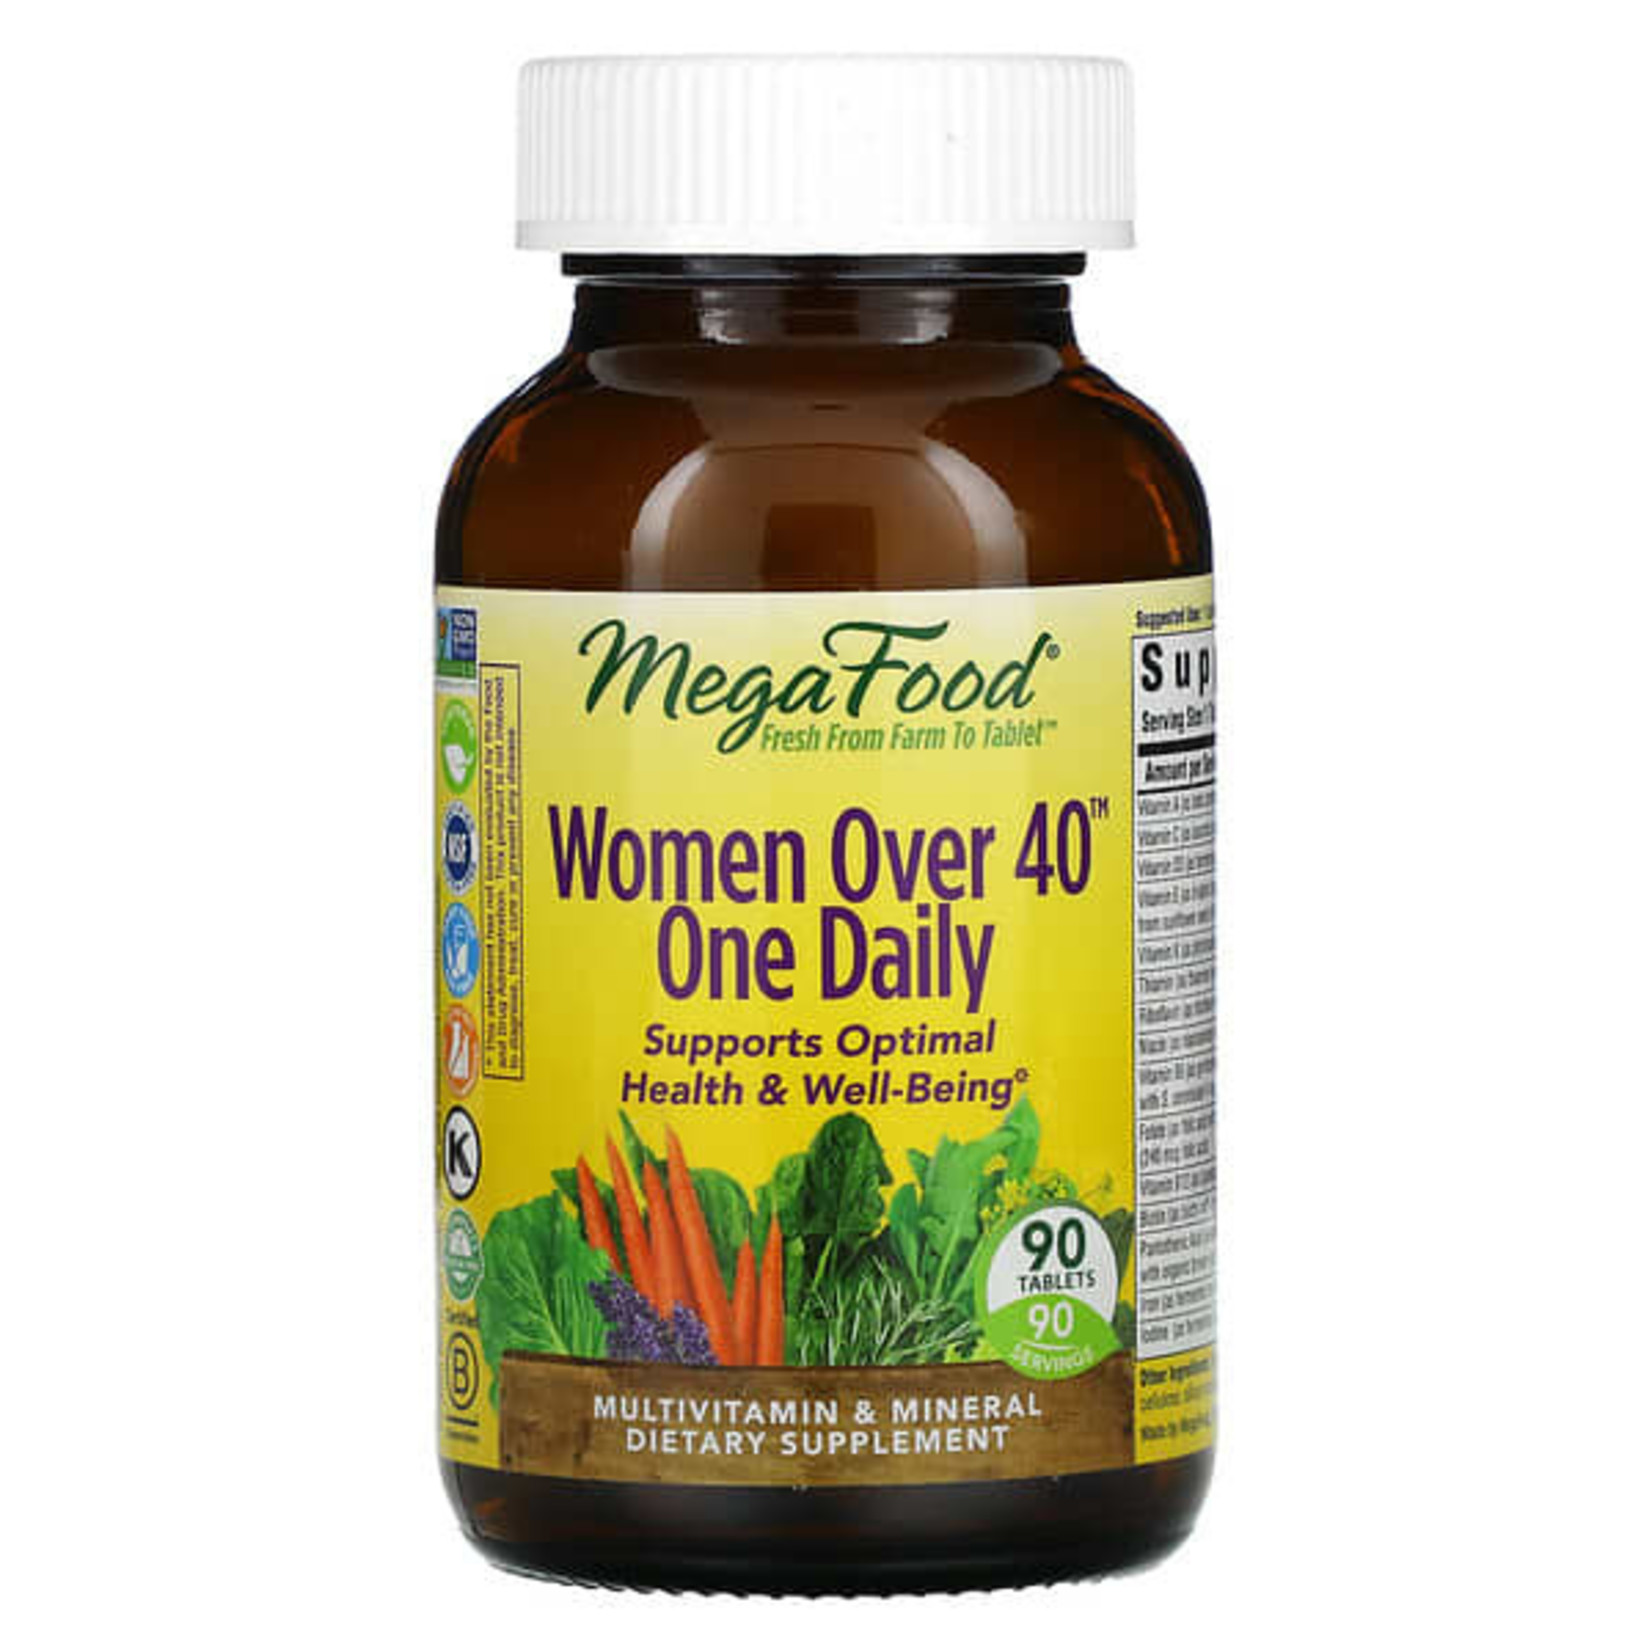 Megafood Megafood - Women Over 40 One Daily - 90 Tablets